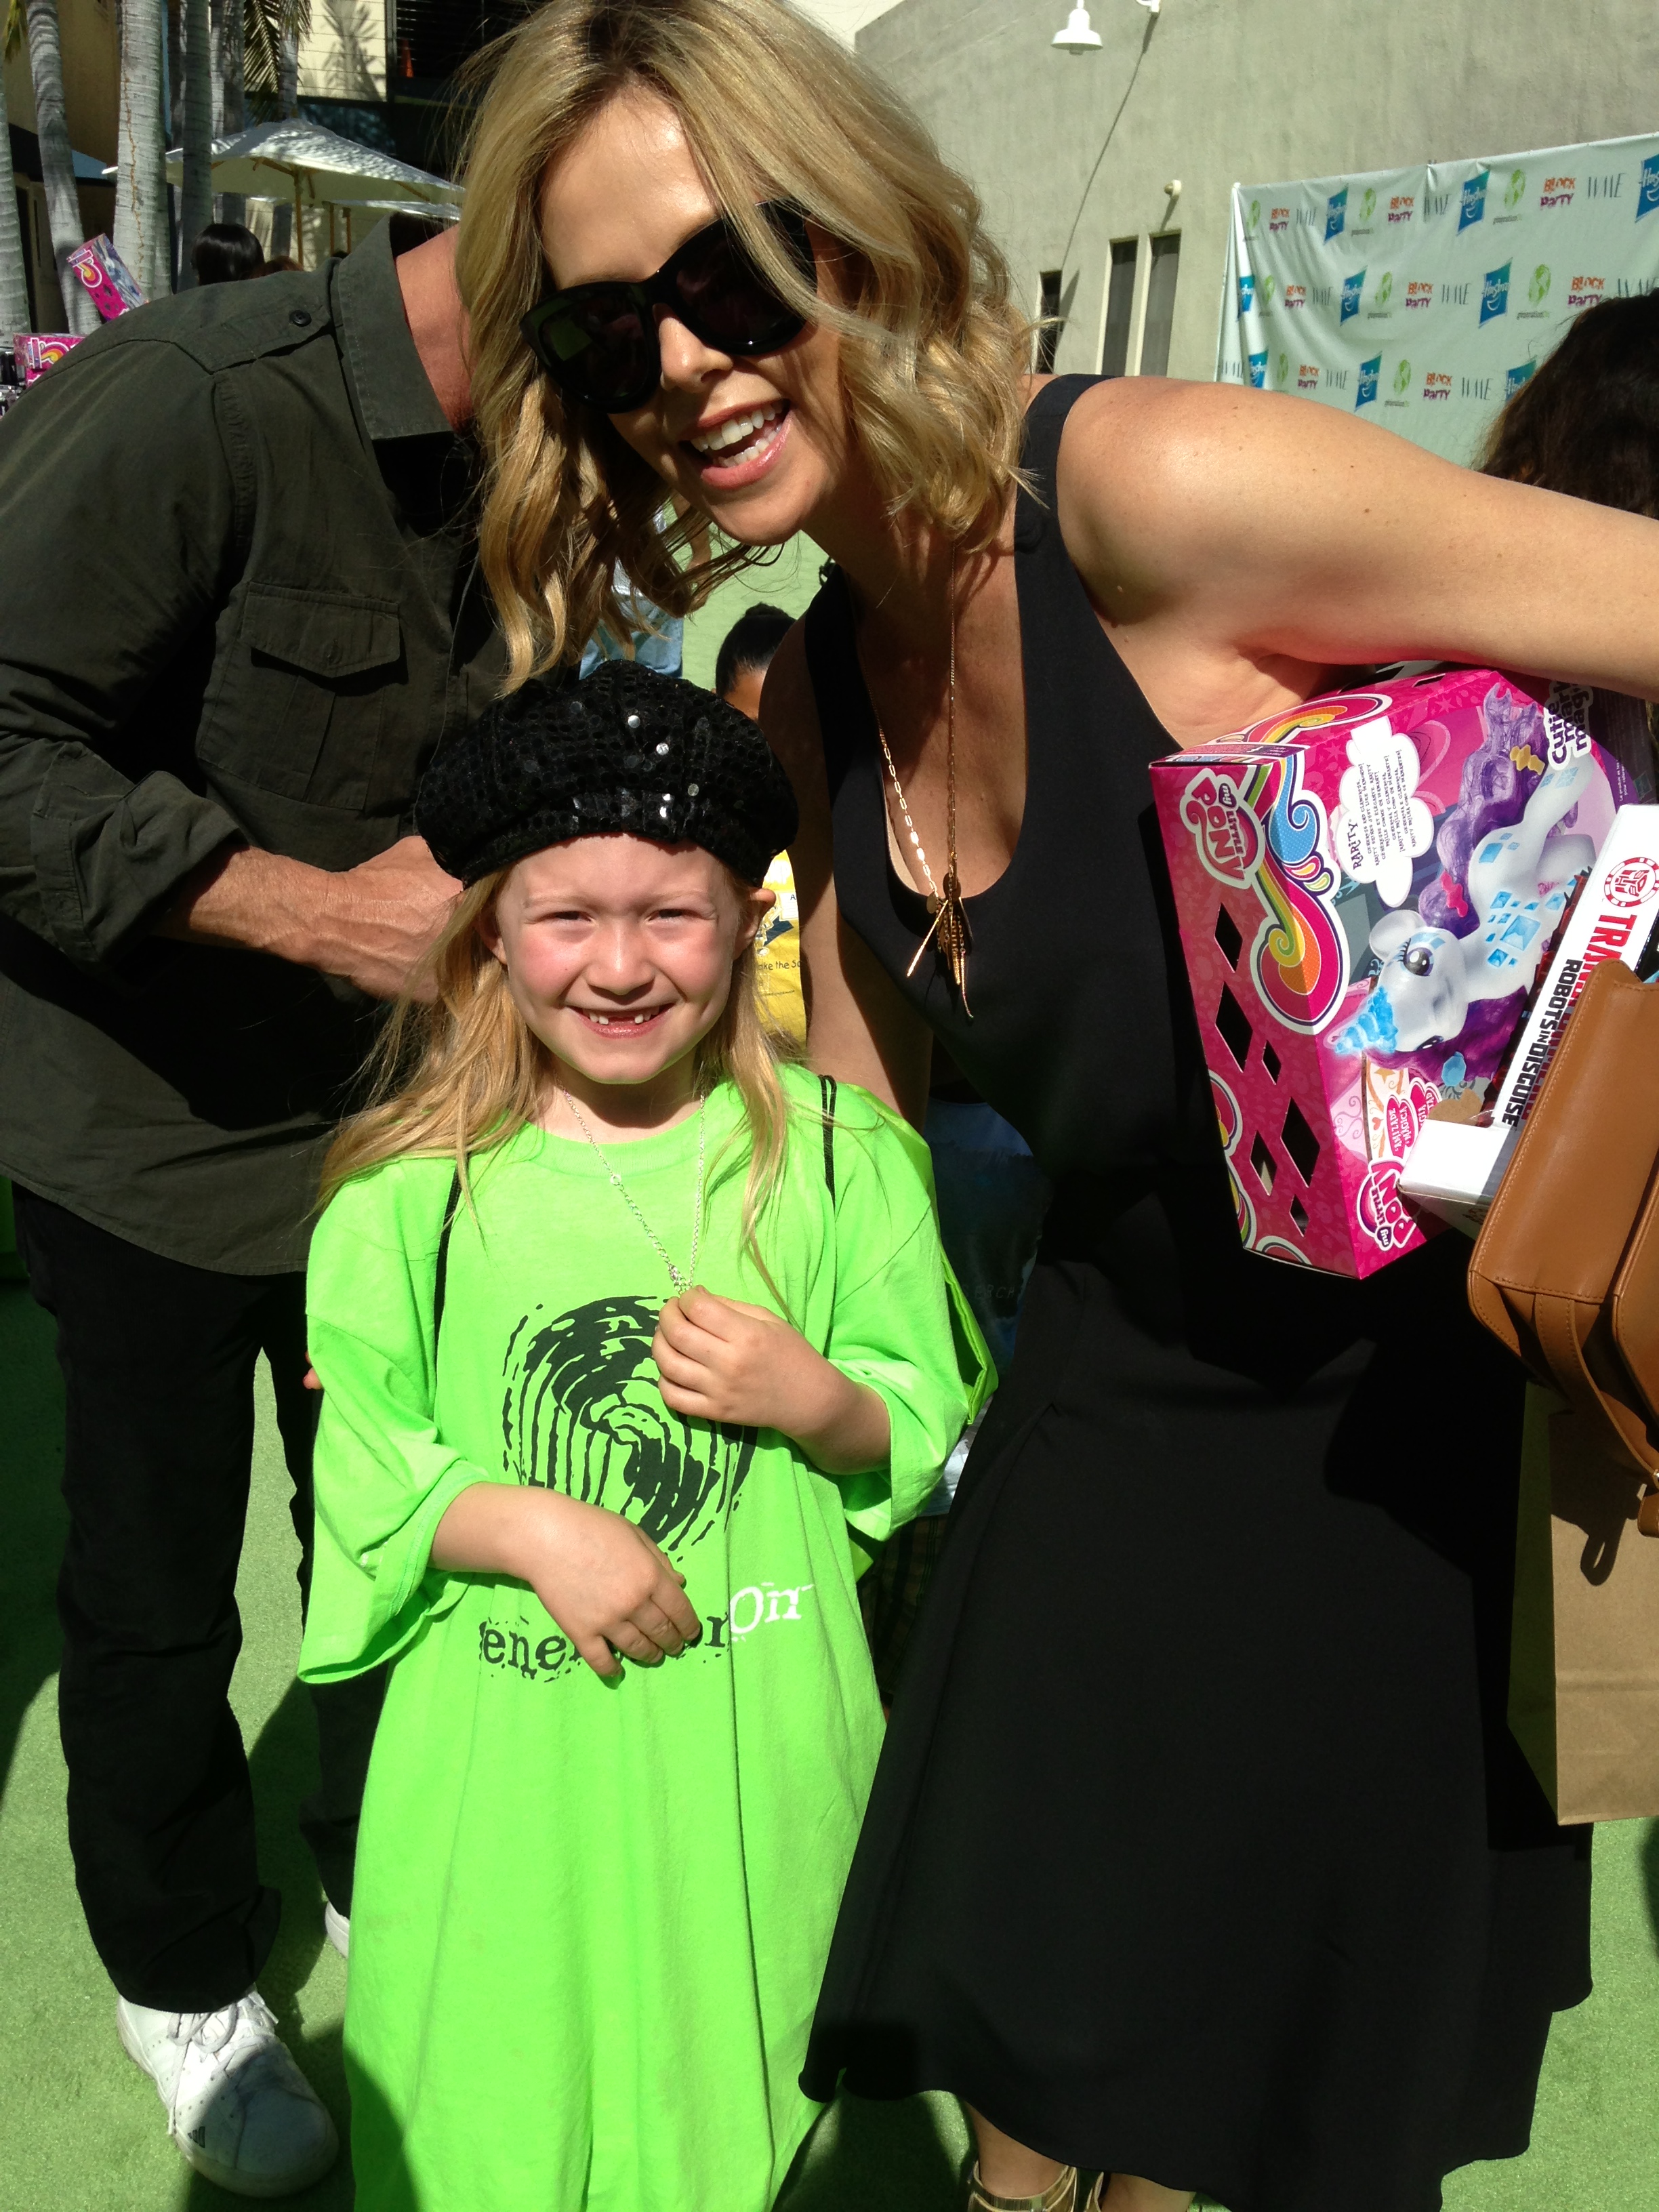 Actress Abigail Zoe Lewis meets Charlize Theron at the Points of Light generationOn Block Party on April 18, 2015 in Los Angeles, California.